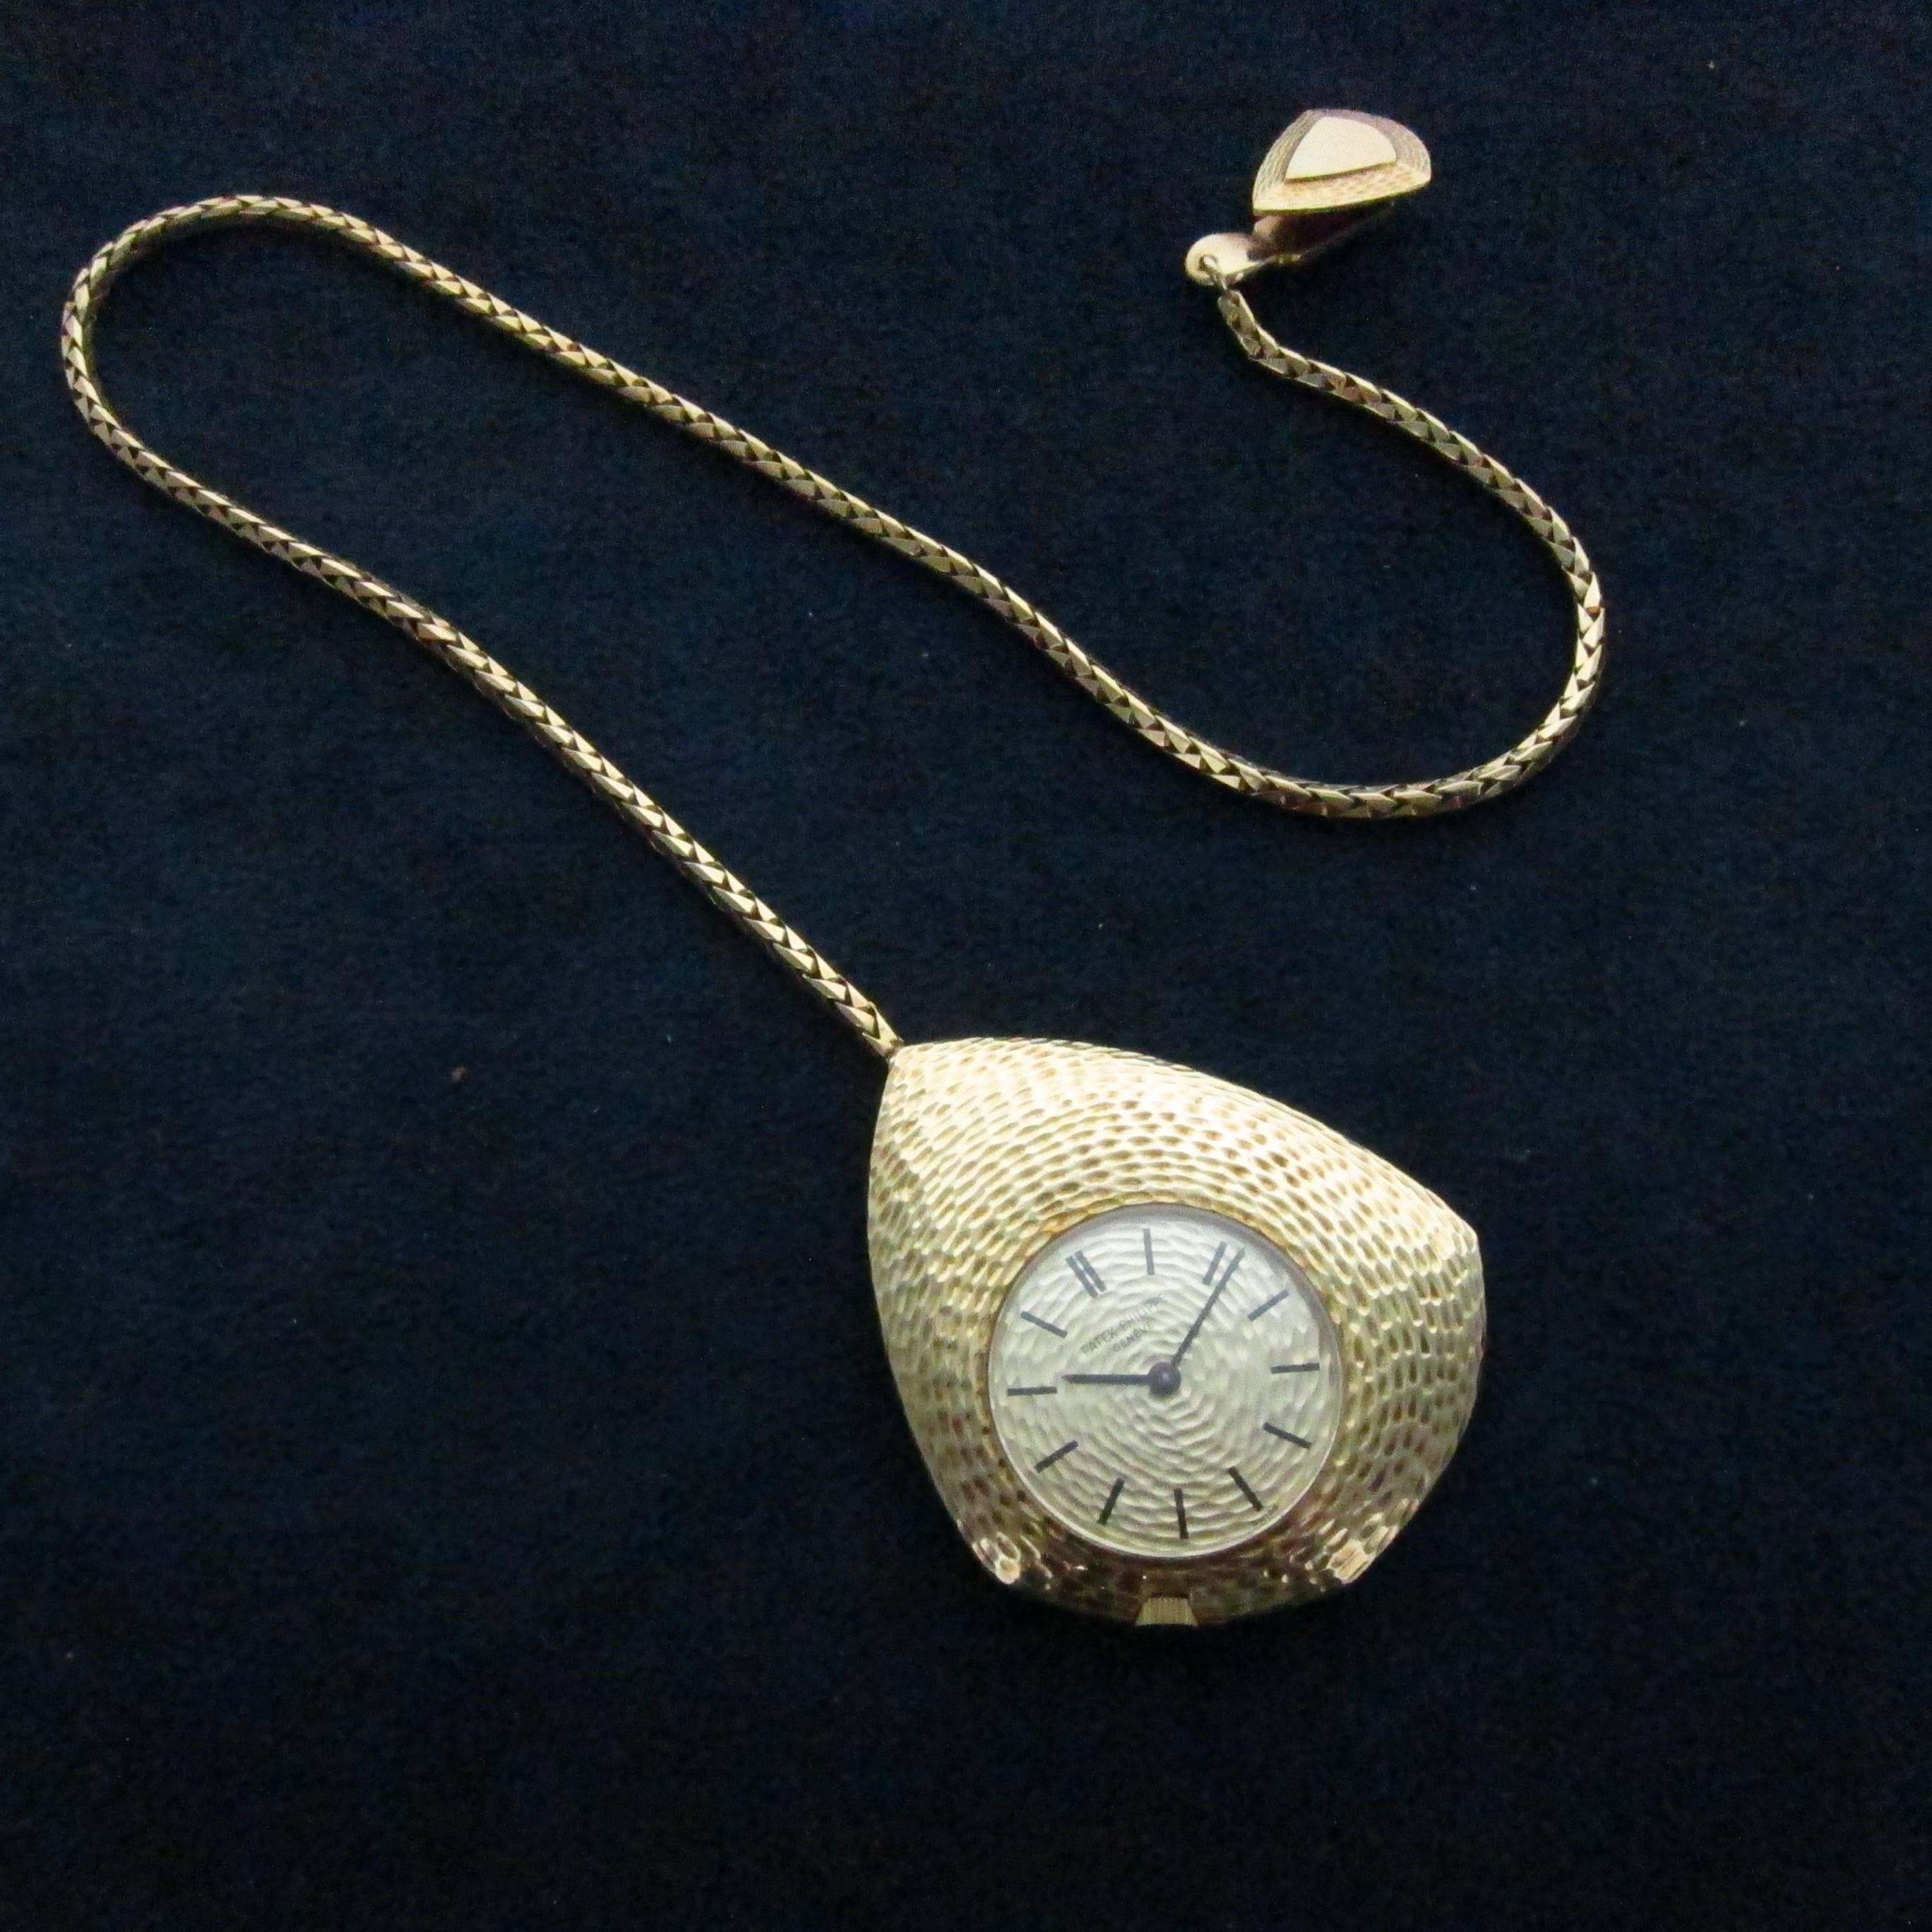 An unusual and rare Patek Philippe keyless lever pocket watch with fitted chain in 18k yellow gold. Hammered-finish textured case. 18 jewel calibre 23-300 mechanical movement. 18k Gold Patek Philippe link watch chain and fob, case, dial and movement